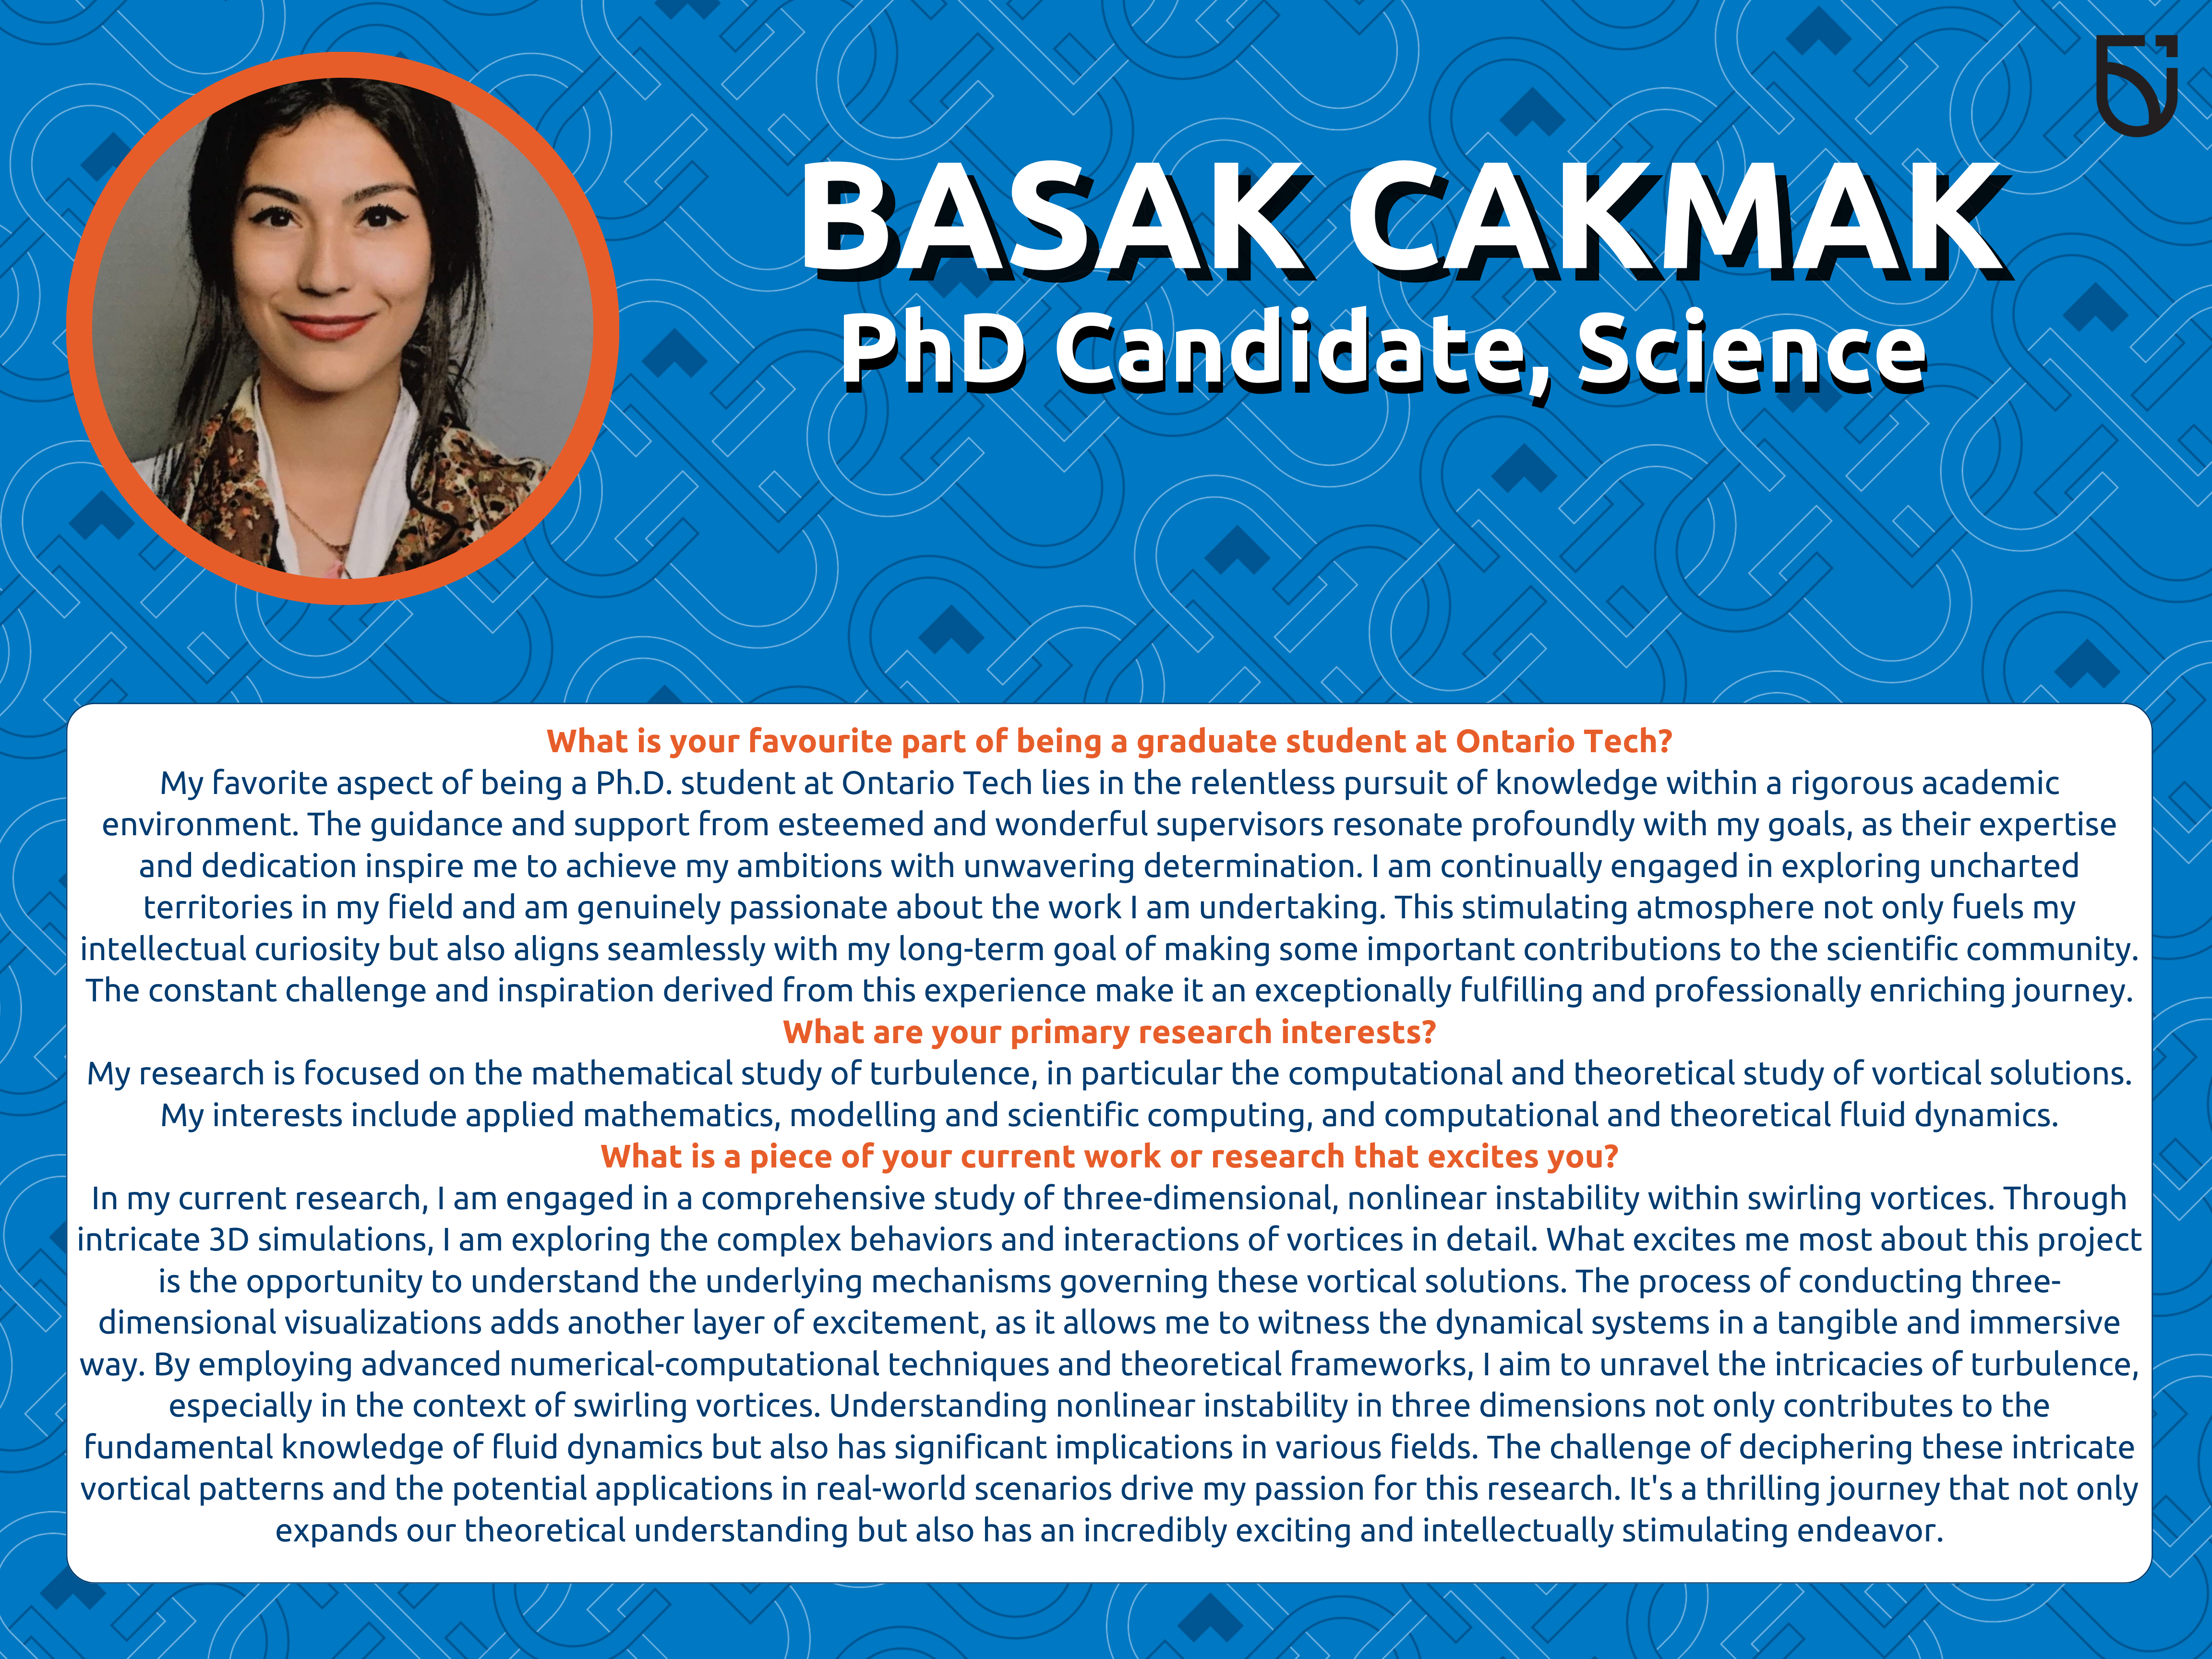 This photo is a Women’s Wednesday feature of Basak Cakmak, a PhD Candidate in the Faculty of Science